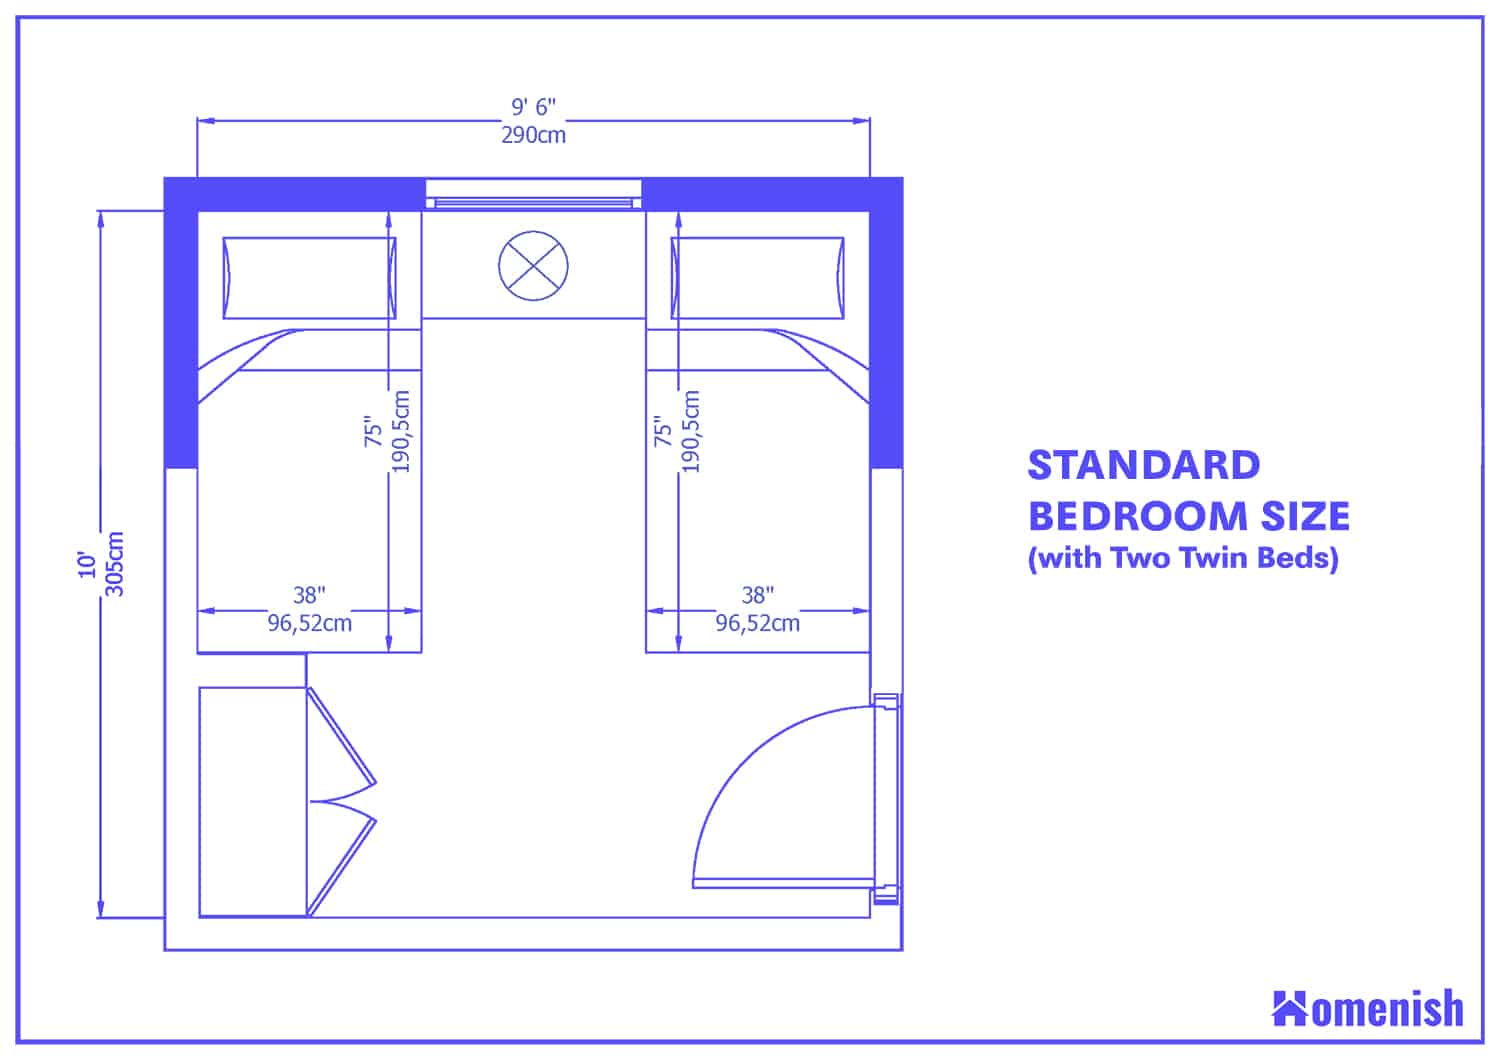 Average Bedroom Size And Layout Guide, What Are The Dimensions Of A Twin Bed